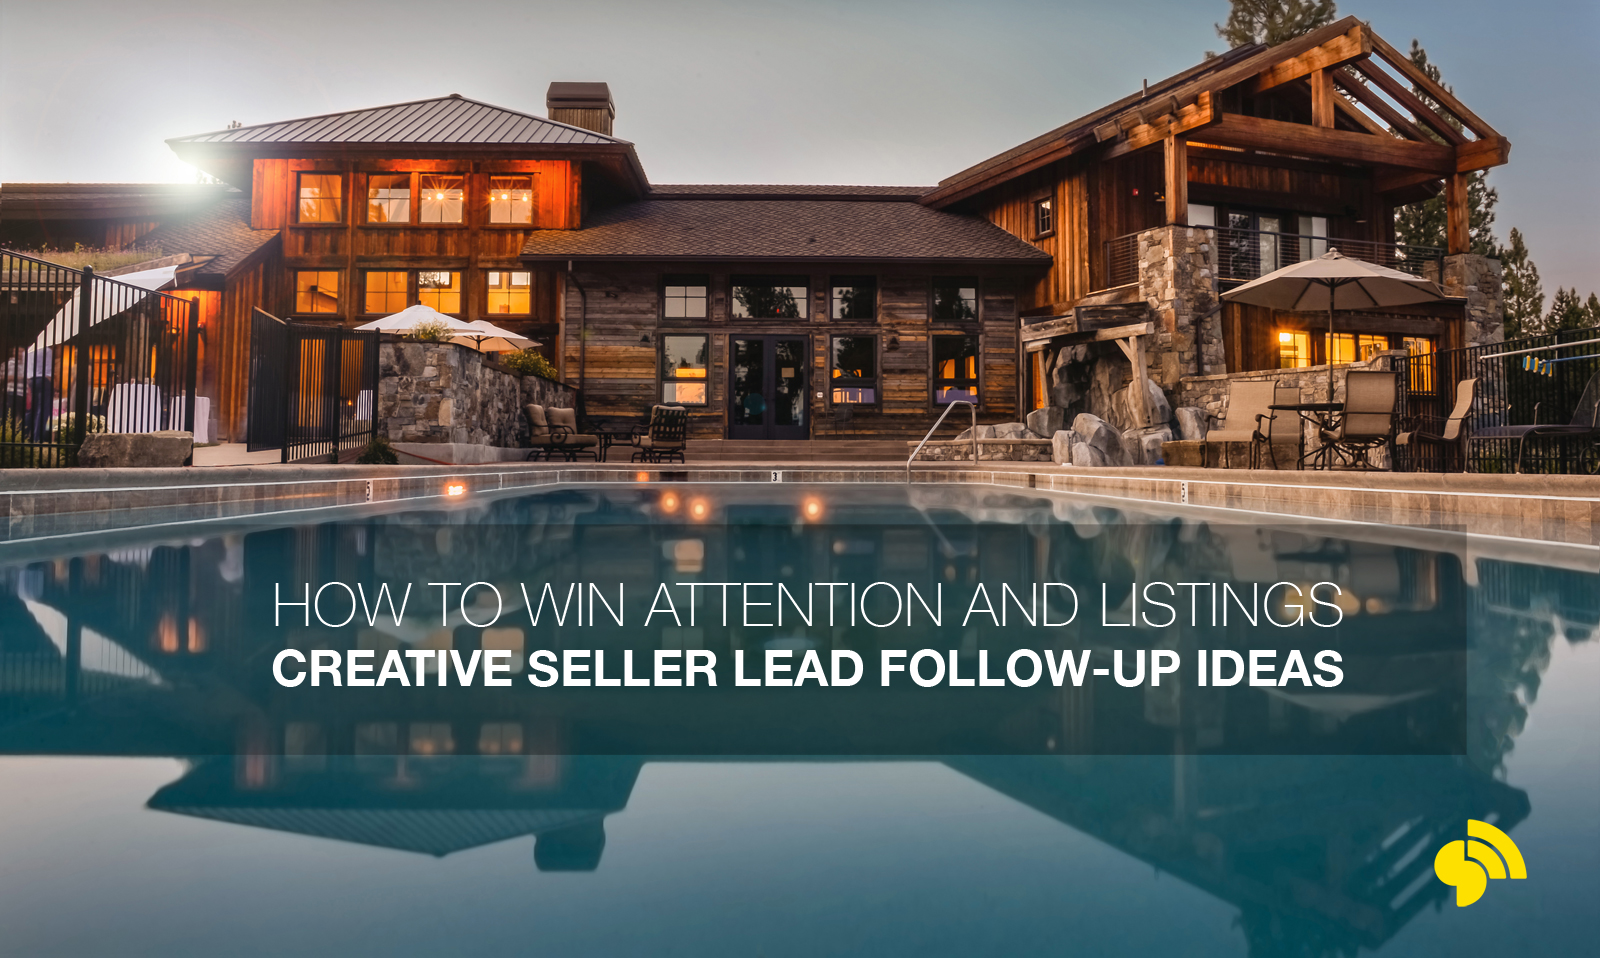 Creative ideas to win listings from seller leads